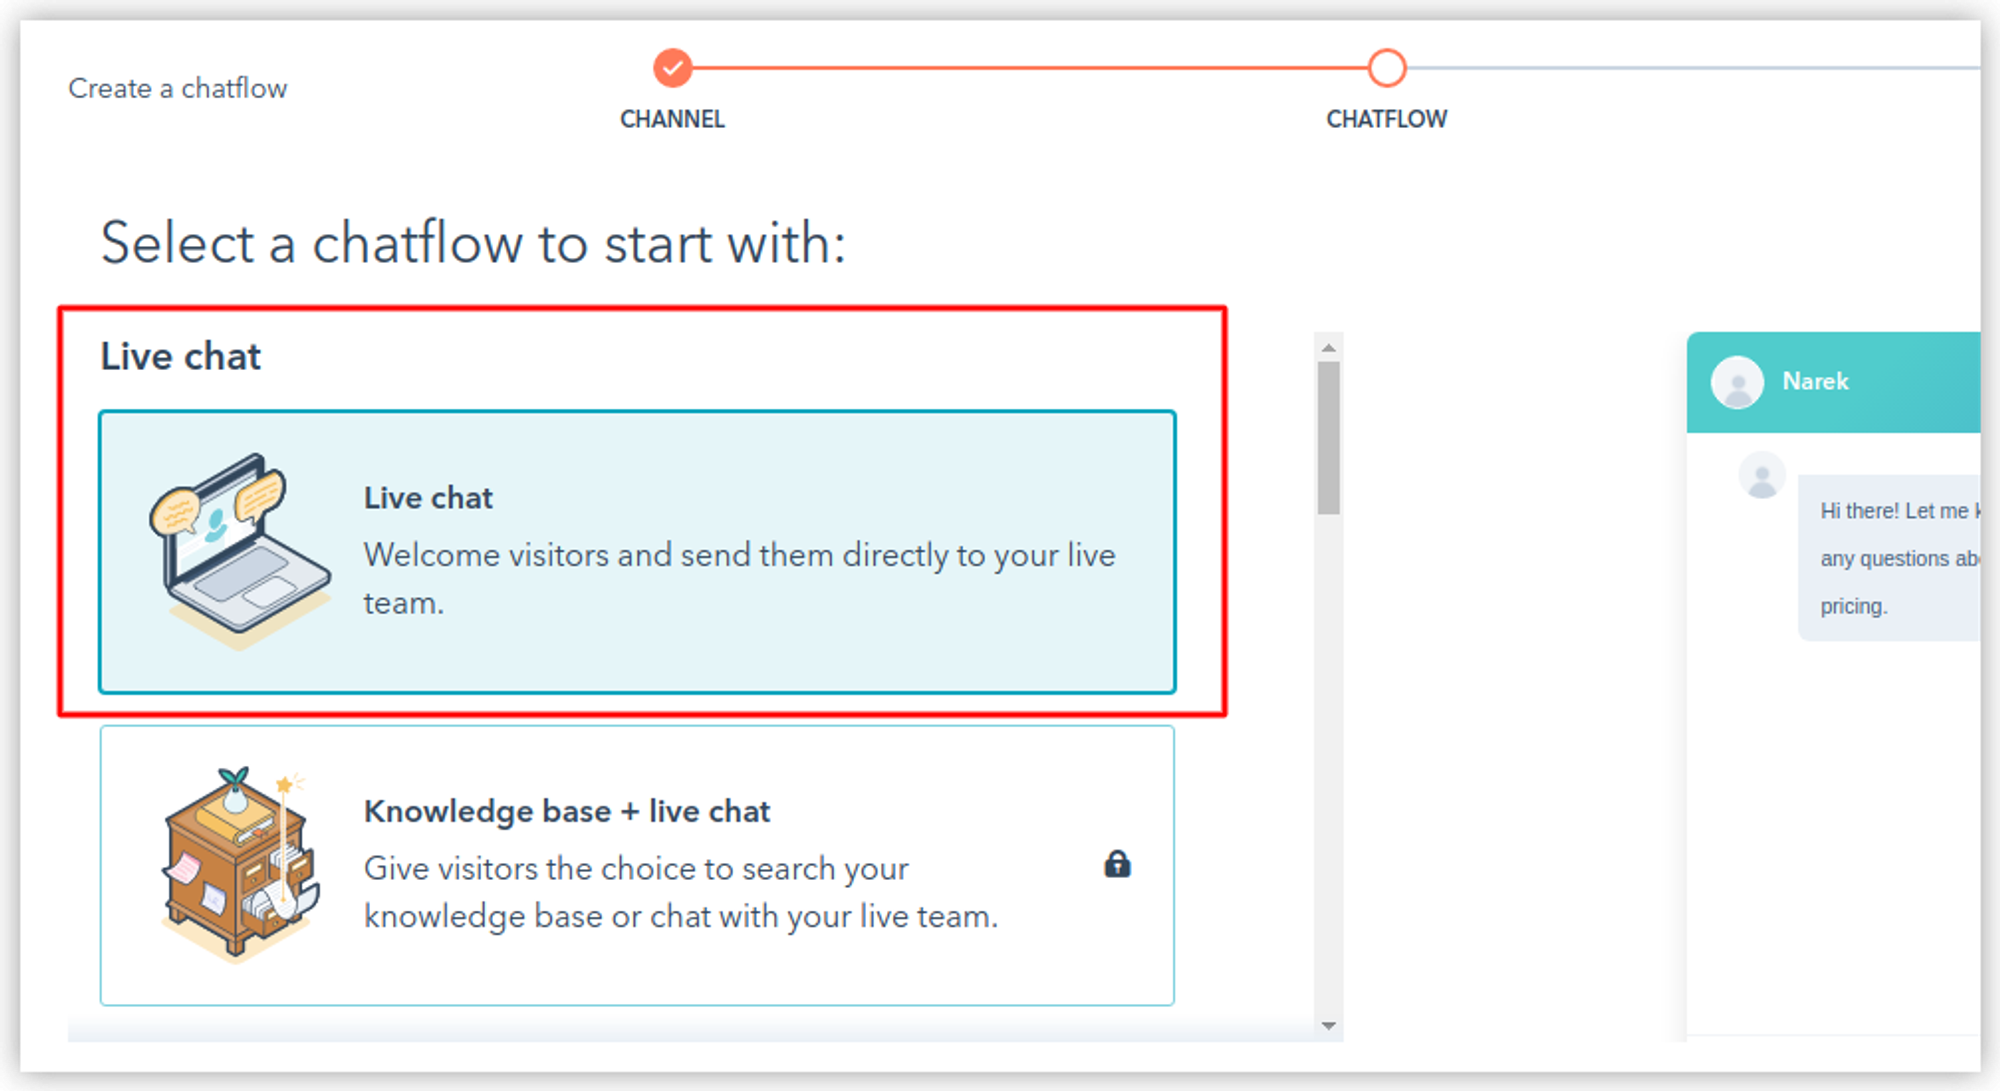 Selecting the “Live chat”option